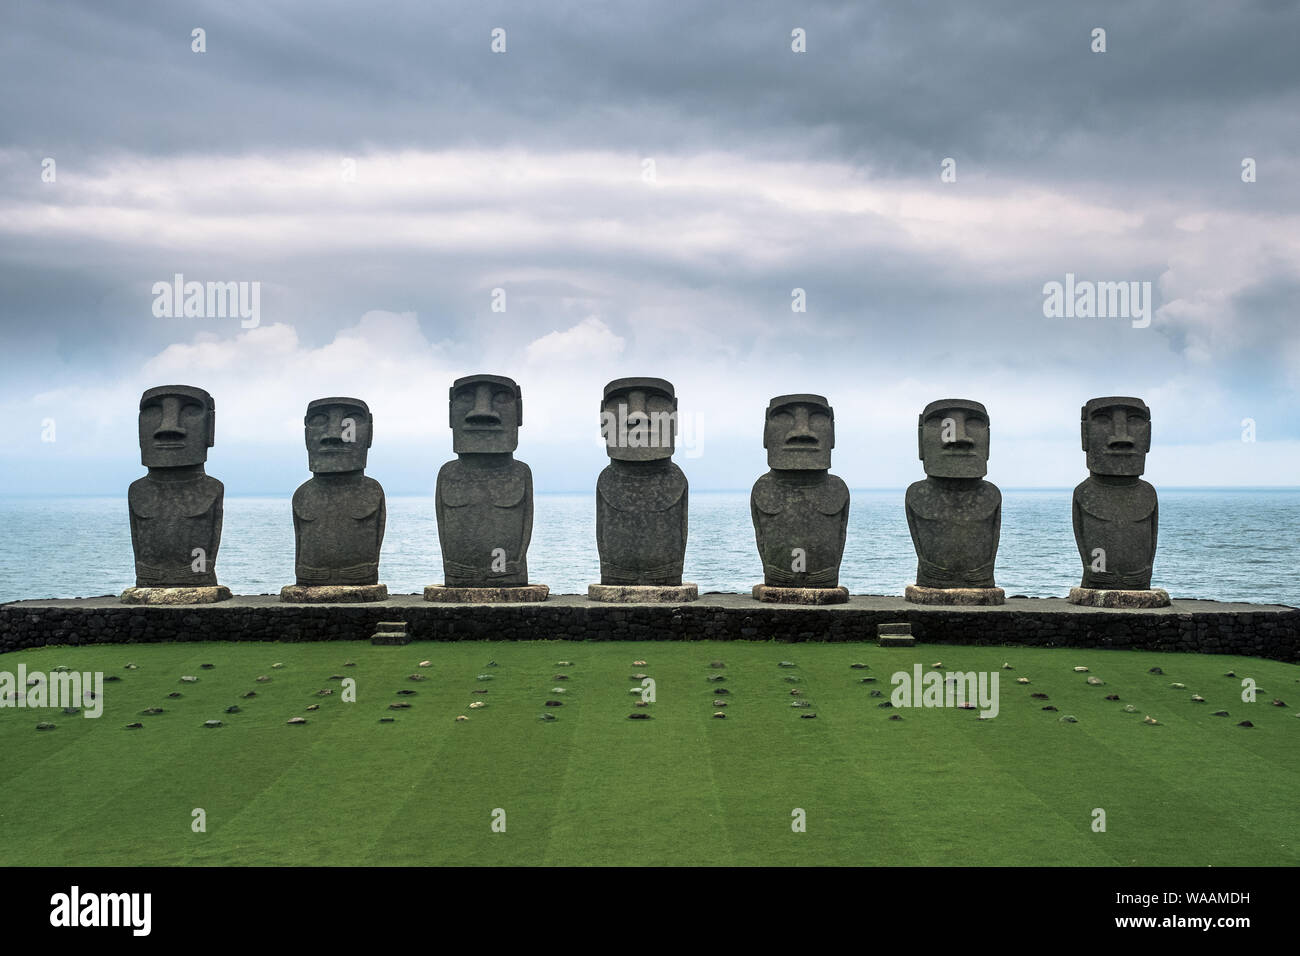 The seven Easter Island replica Moai statues at Sun Messe Nichinan in Miyazaki Prefecture with the Pacific Ocean in the background, Kyushu, Japan Stock Photo